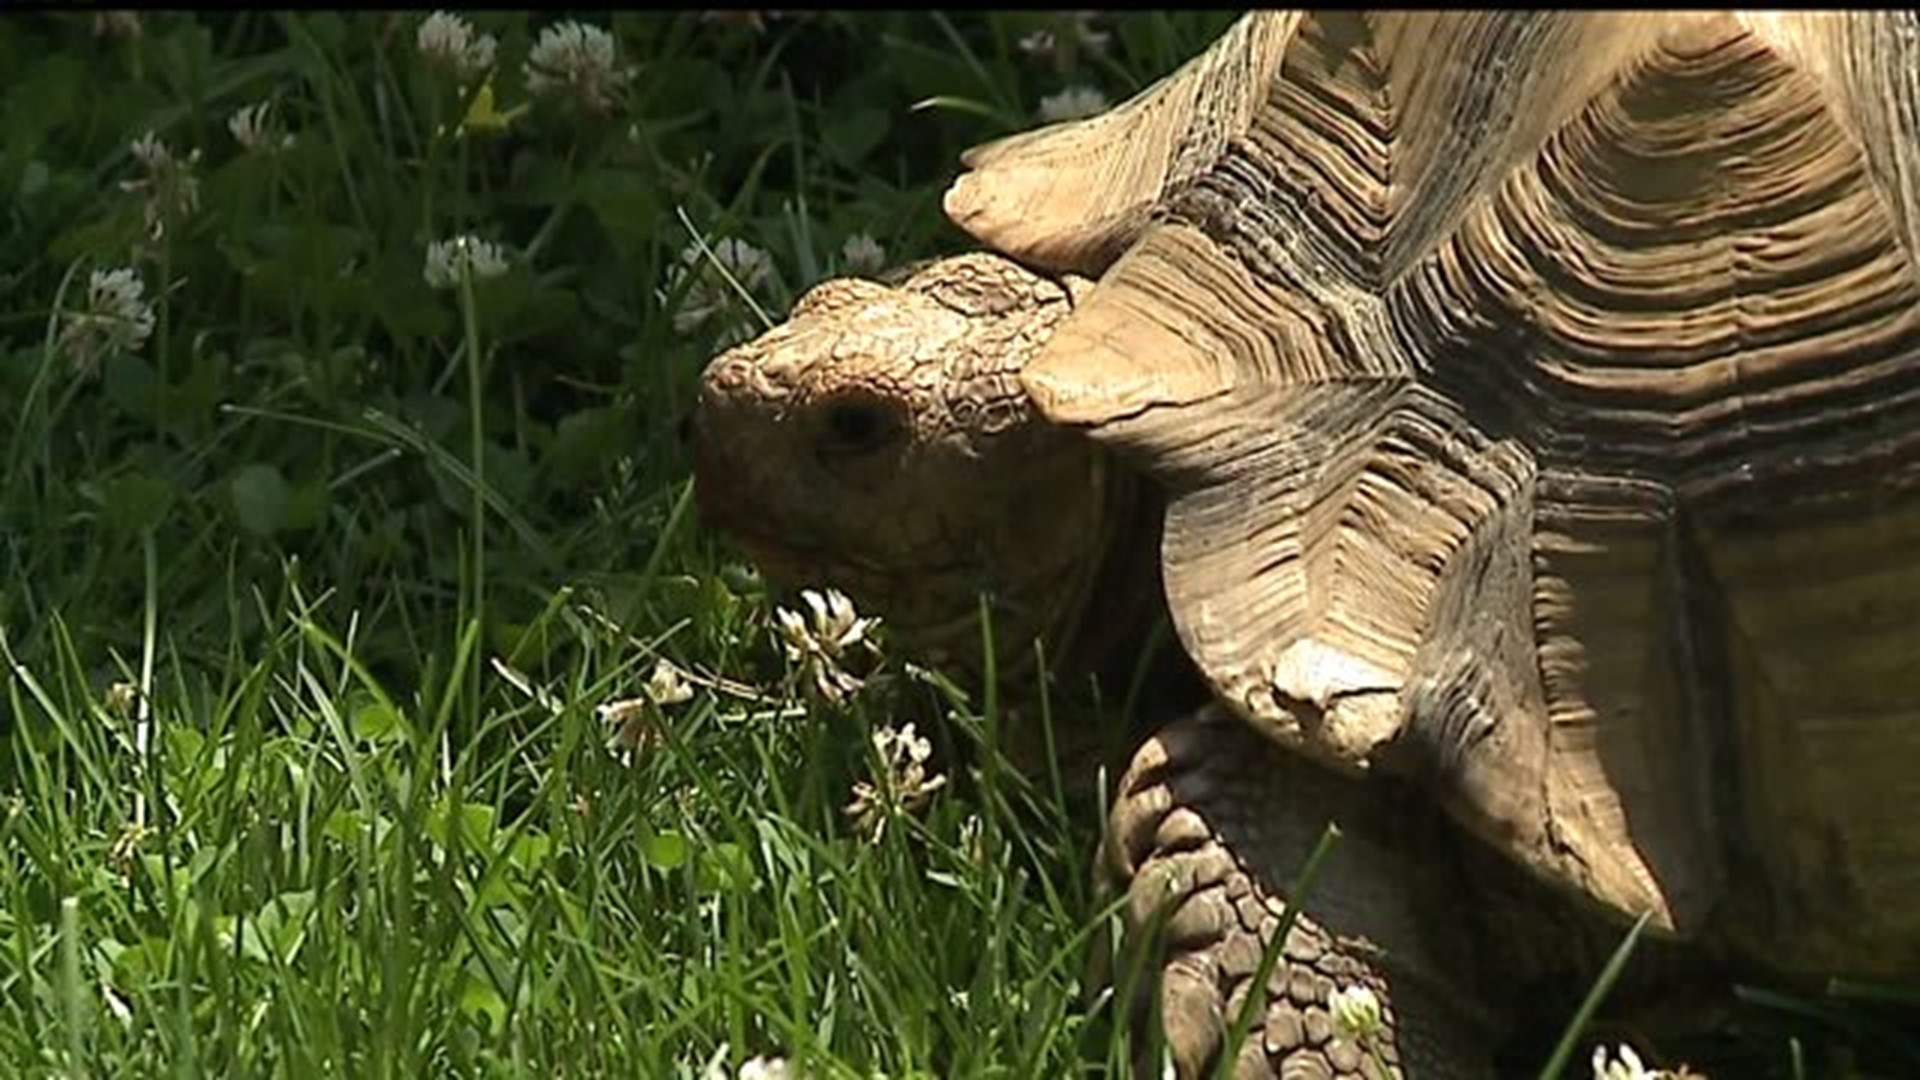 Franky-Lynn the Tortoise reunited with her owner